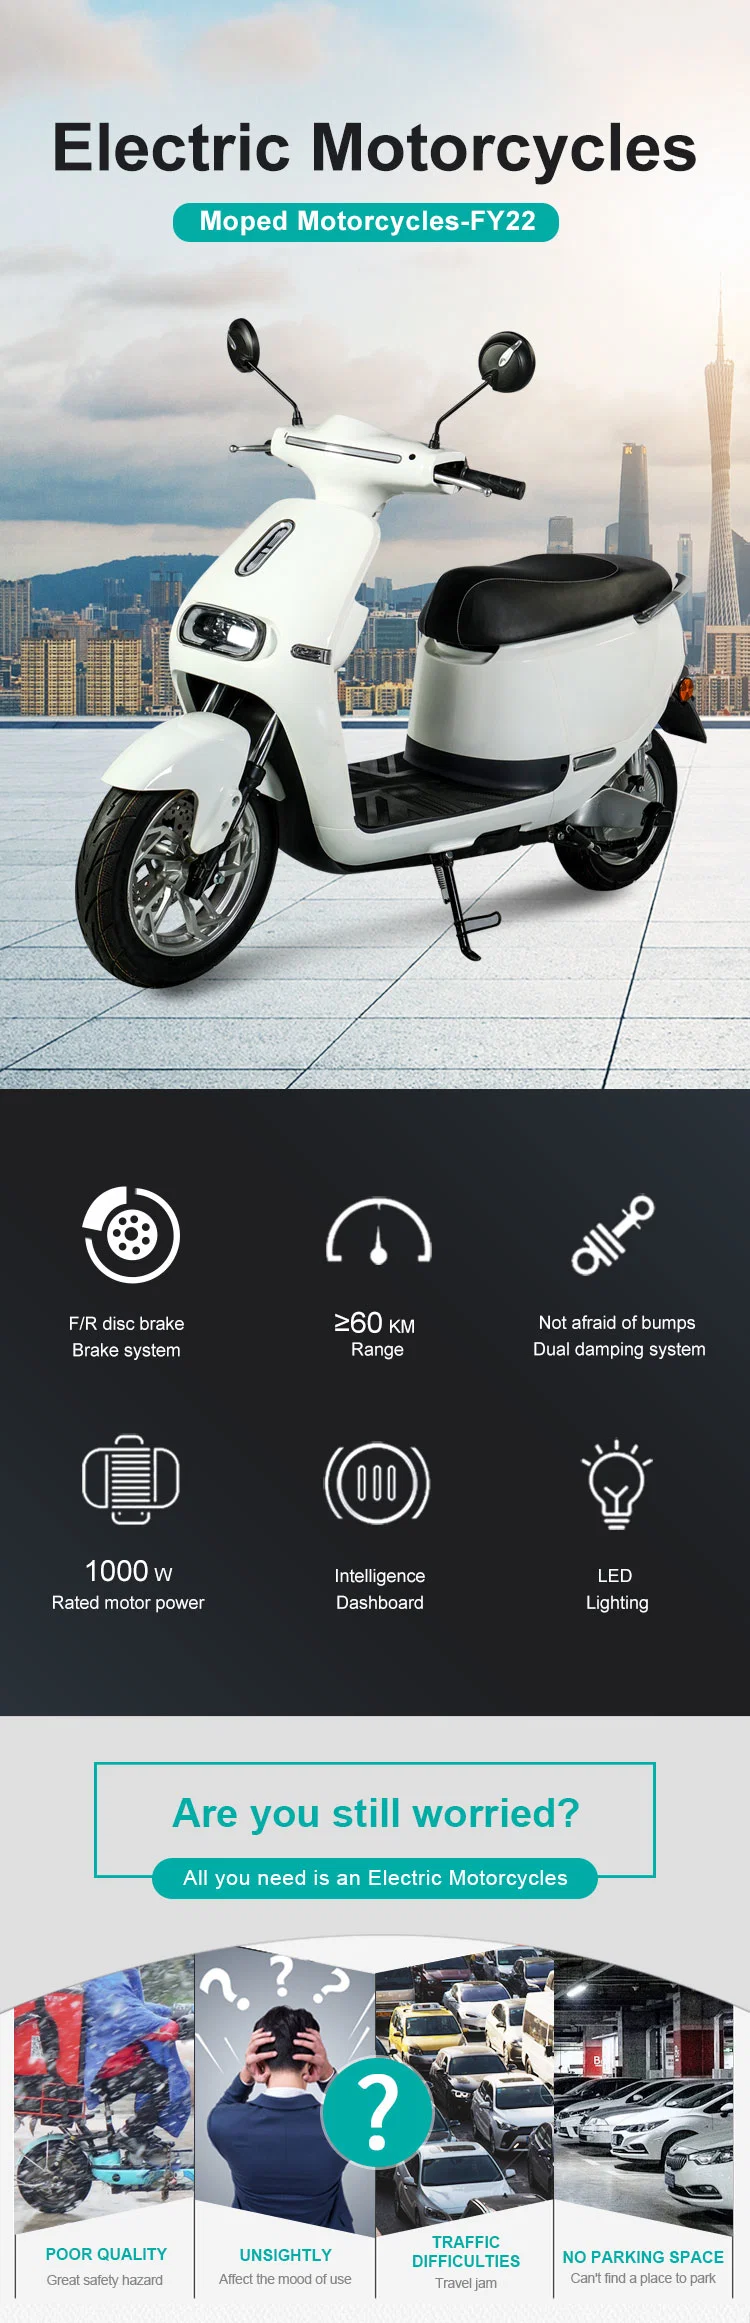 China Factory CKD/SKD Hot Sale Motorcycle Electric Scooter